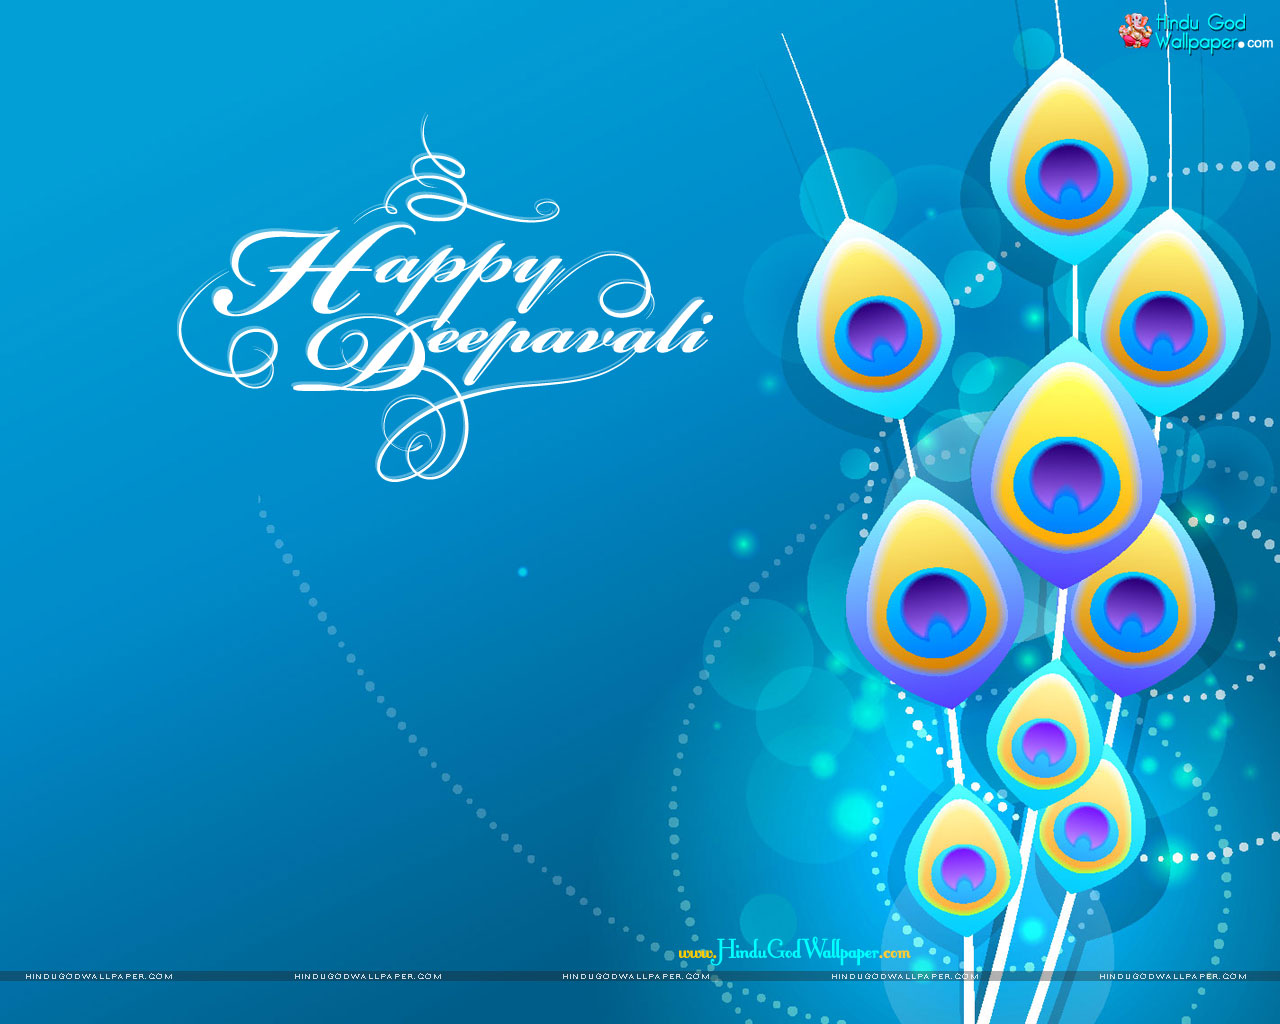 Happy Diwali 2020: Deepavali Wishes Images Download, Photos, Status,  Quotes, Wallpapers, and Messages